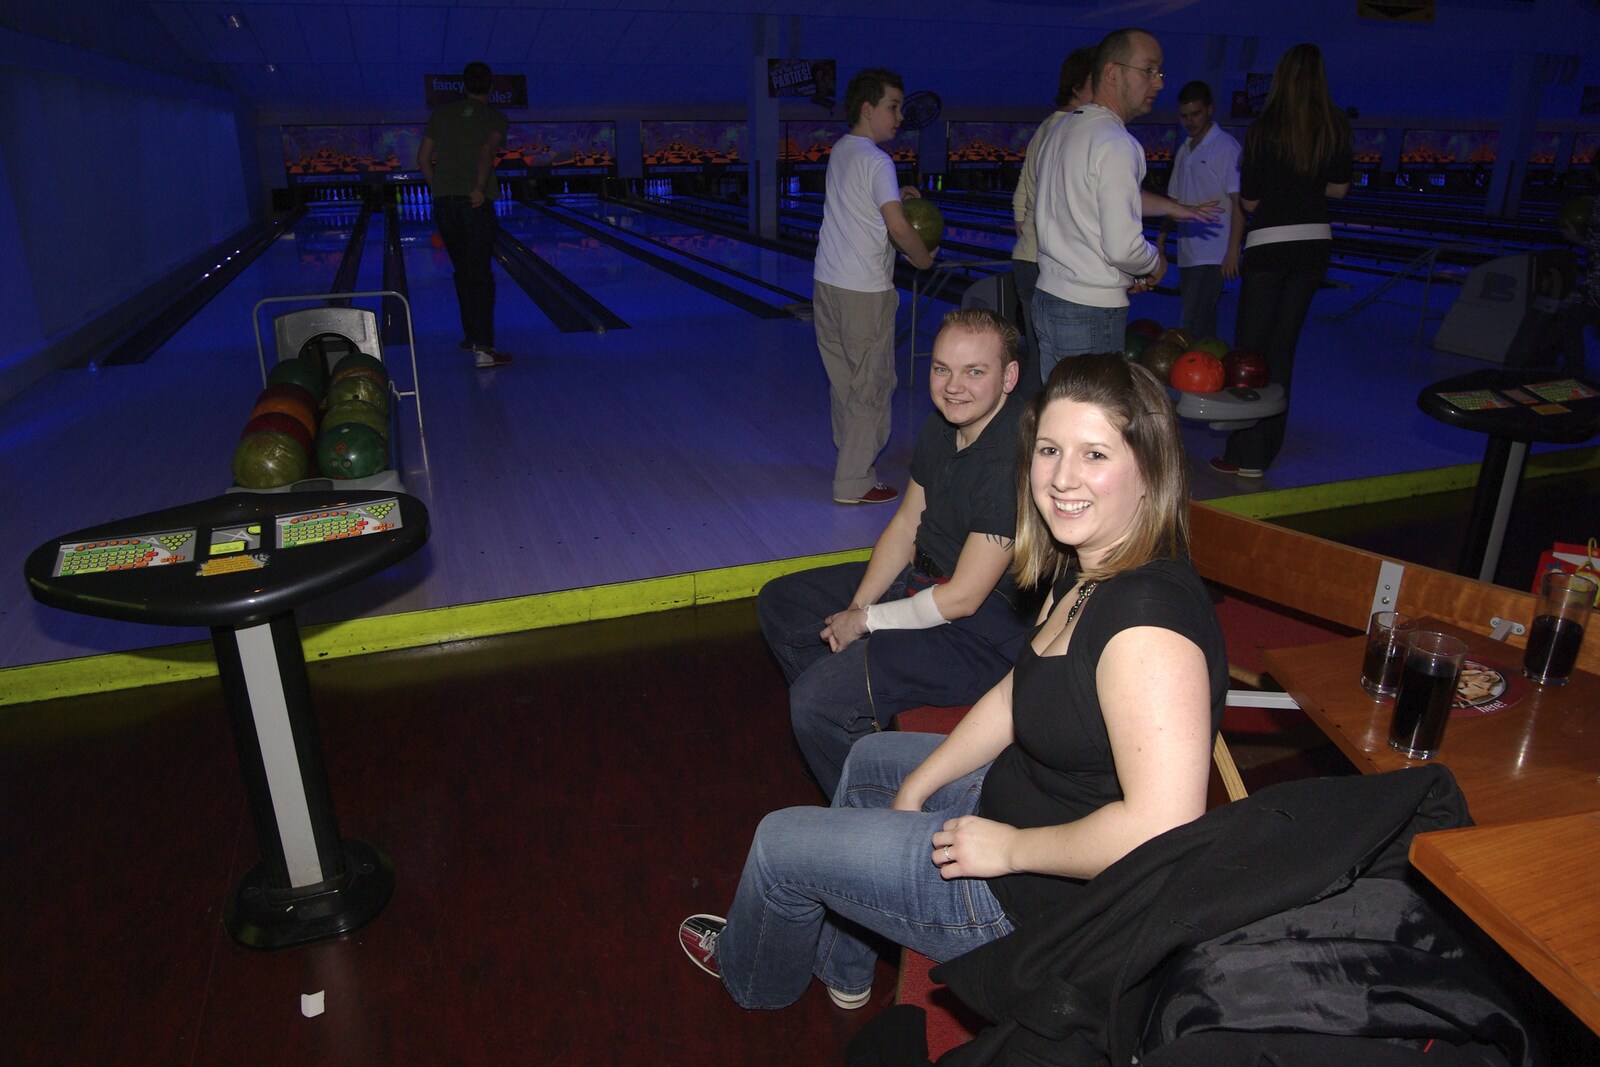 More of the group from Ten-pin Bowling and Birthdays, Cambridge Leisure Park, Cambridge - 17th February 2007